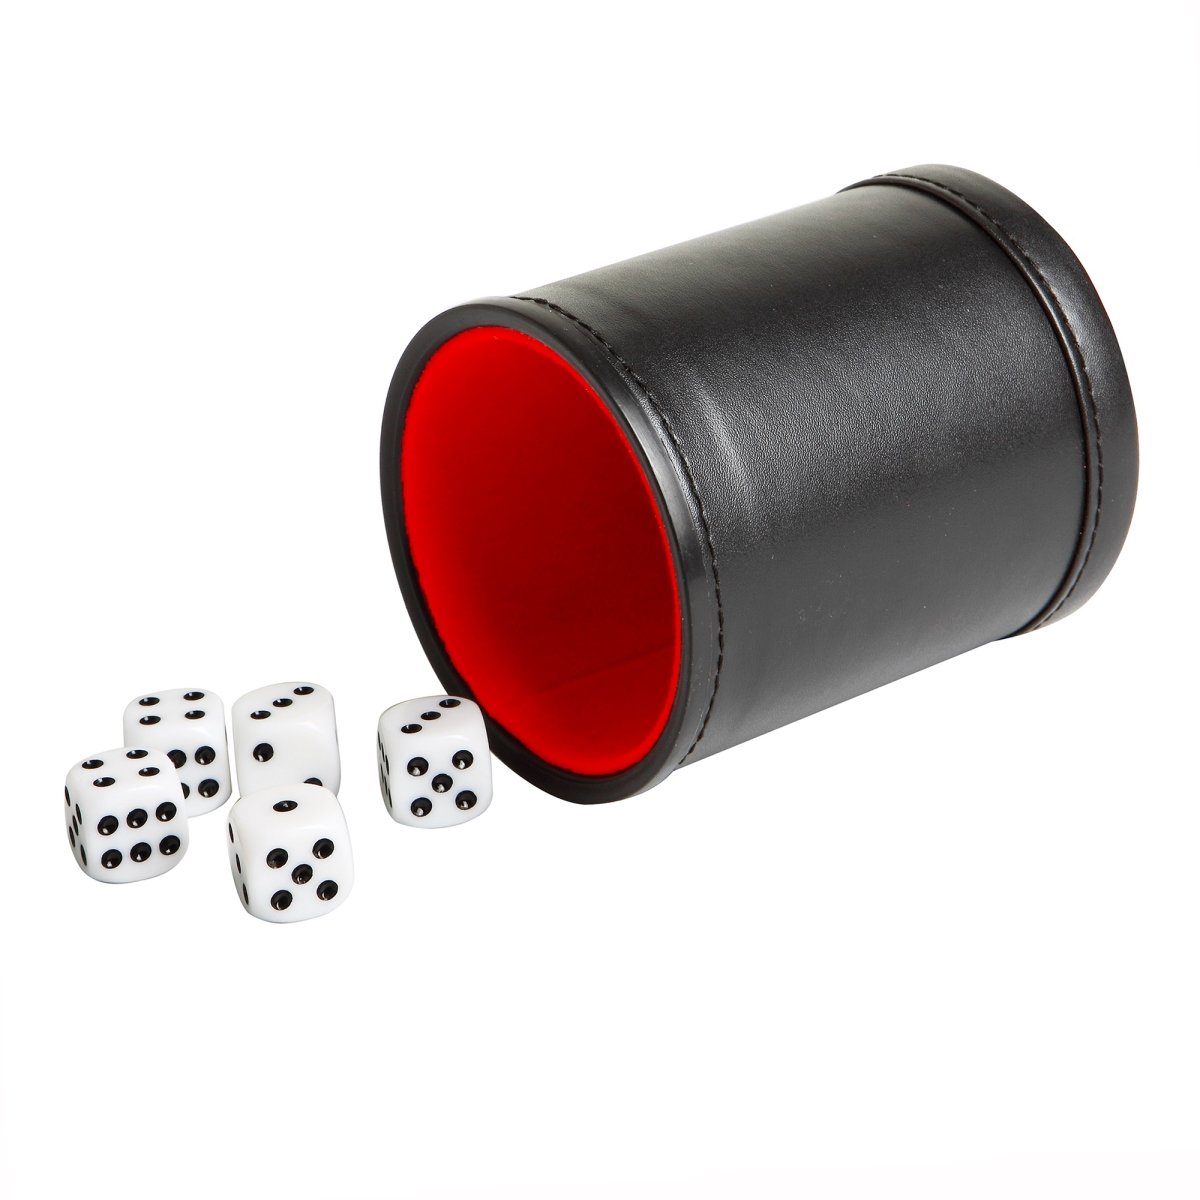 Ng2131 Modifier Dice Cup With 5 Dice